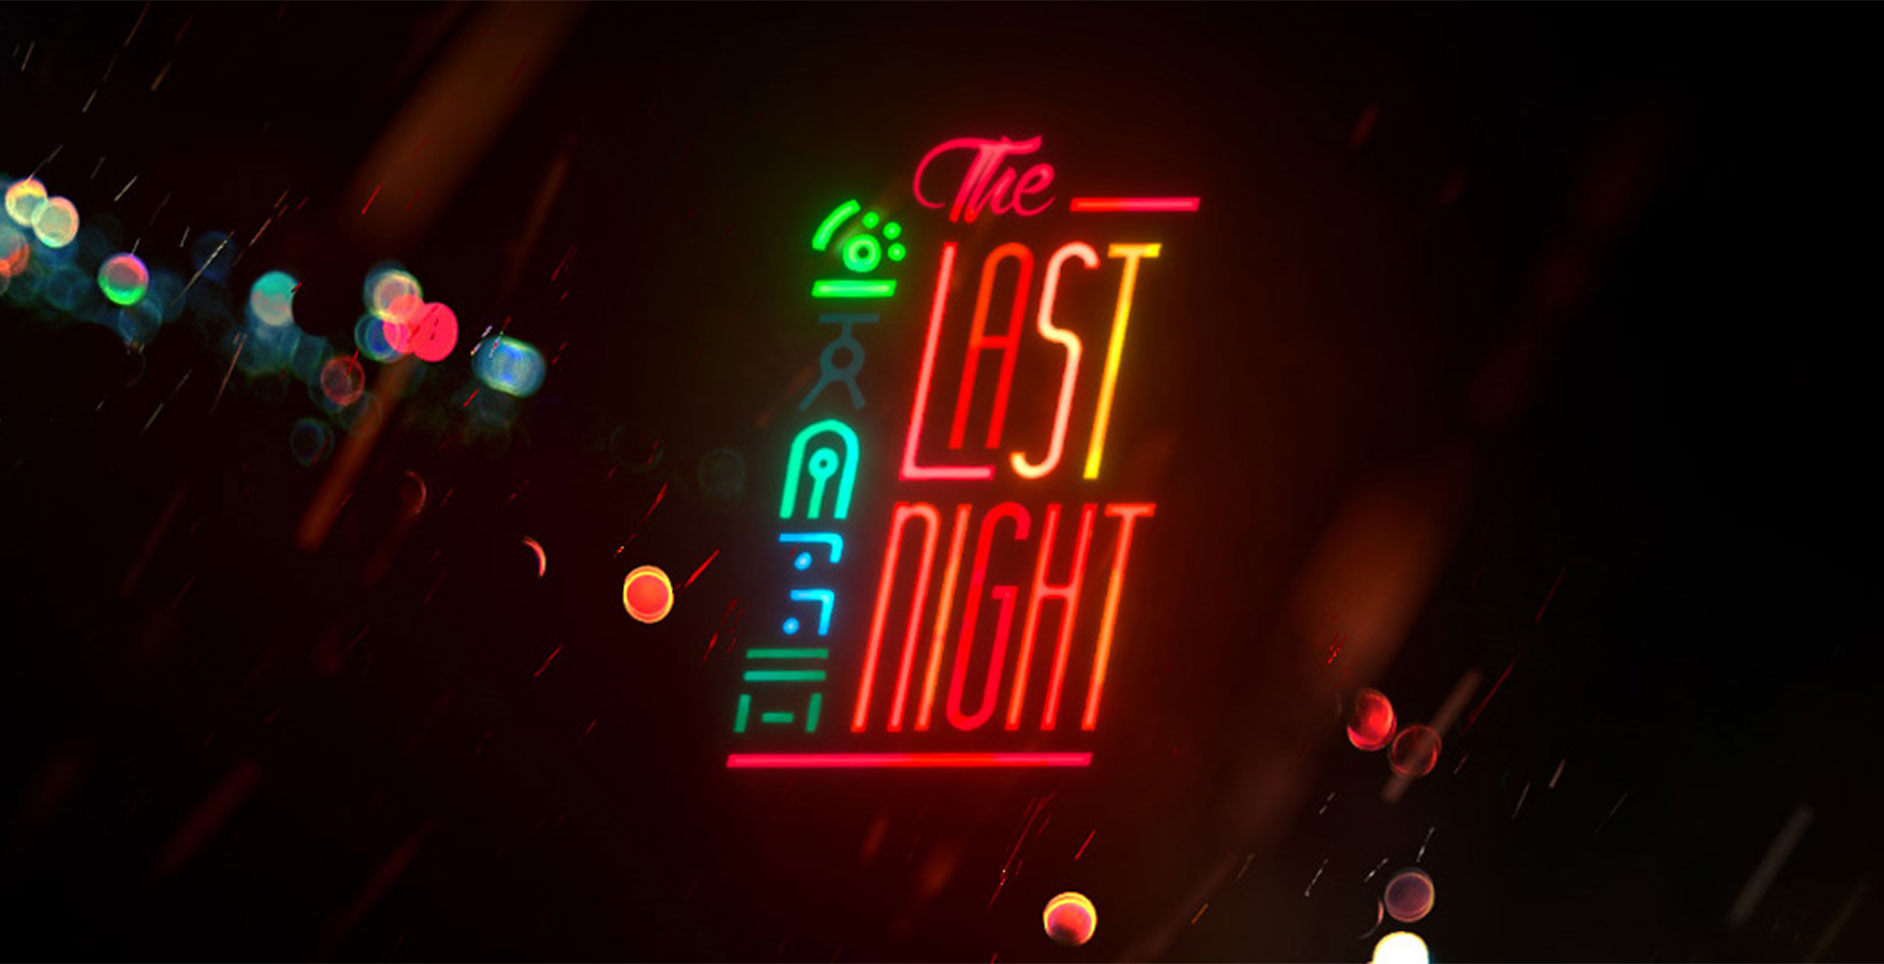 Last night city. The last Night (2021). The last Night игра. The last Night игра обложка. Зе ласт Найт.